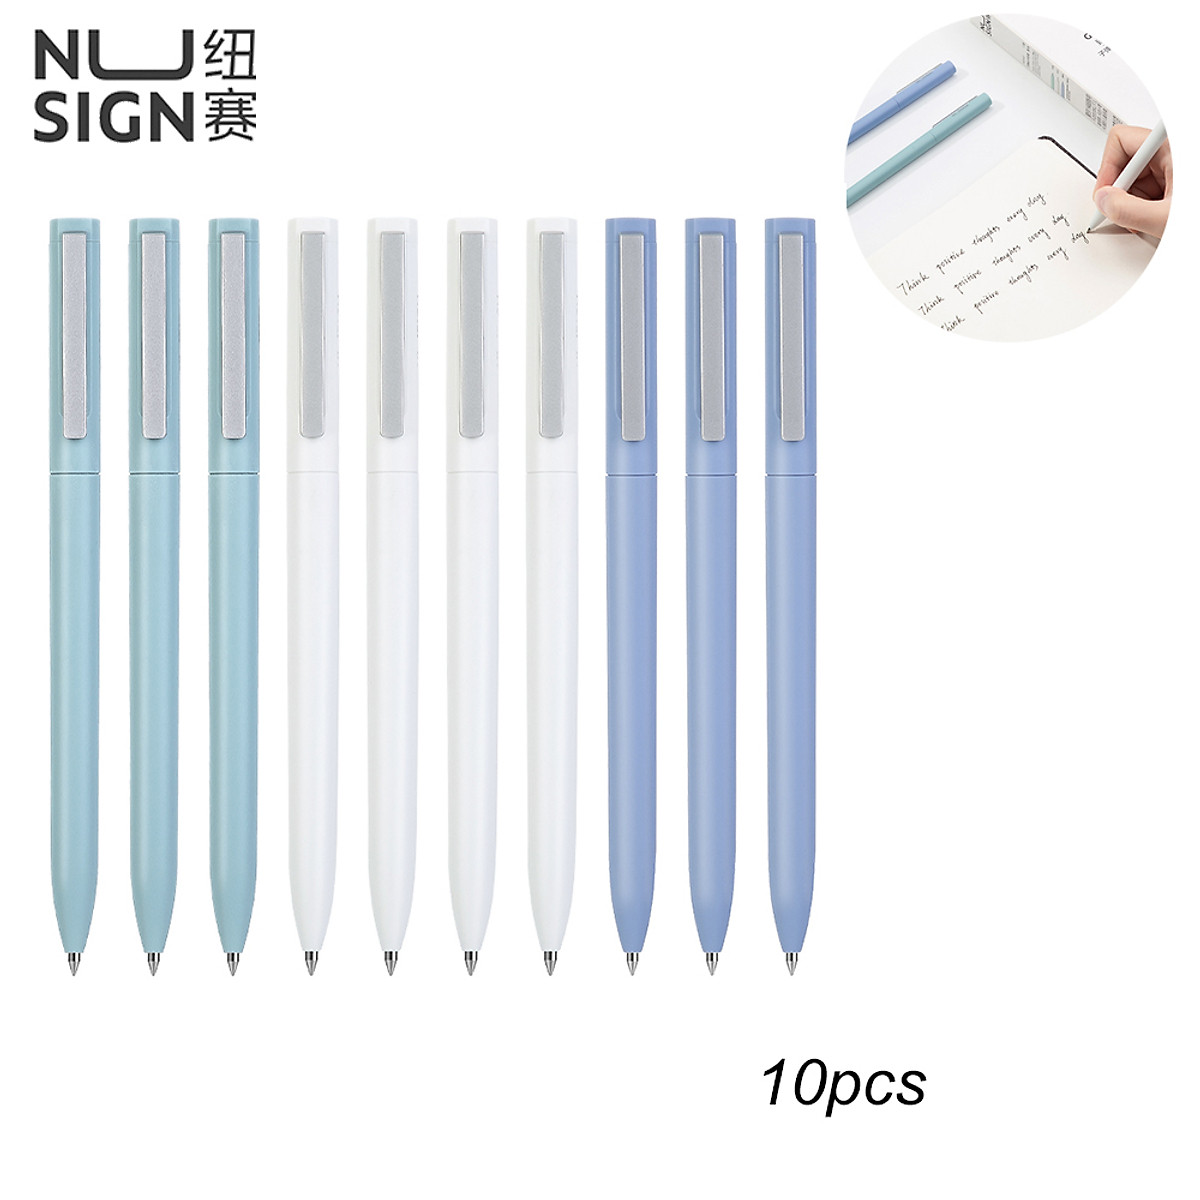 Nusign Simple Press Type Gel Pen 0.5mm Black Ink Bullet Point Signature Pen Smooth Writing Stationary Supplies For Students Office Study Use-Hàng chính hãng